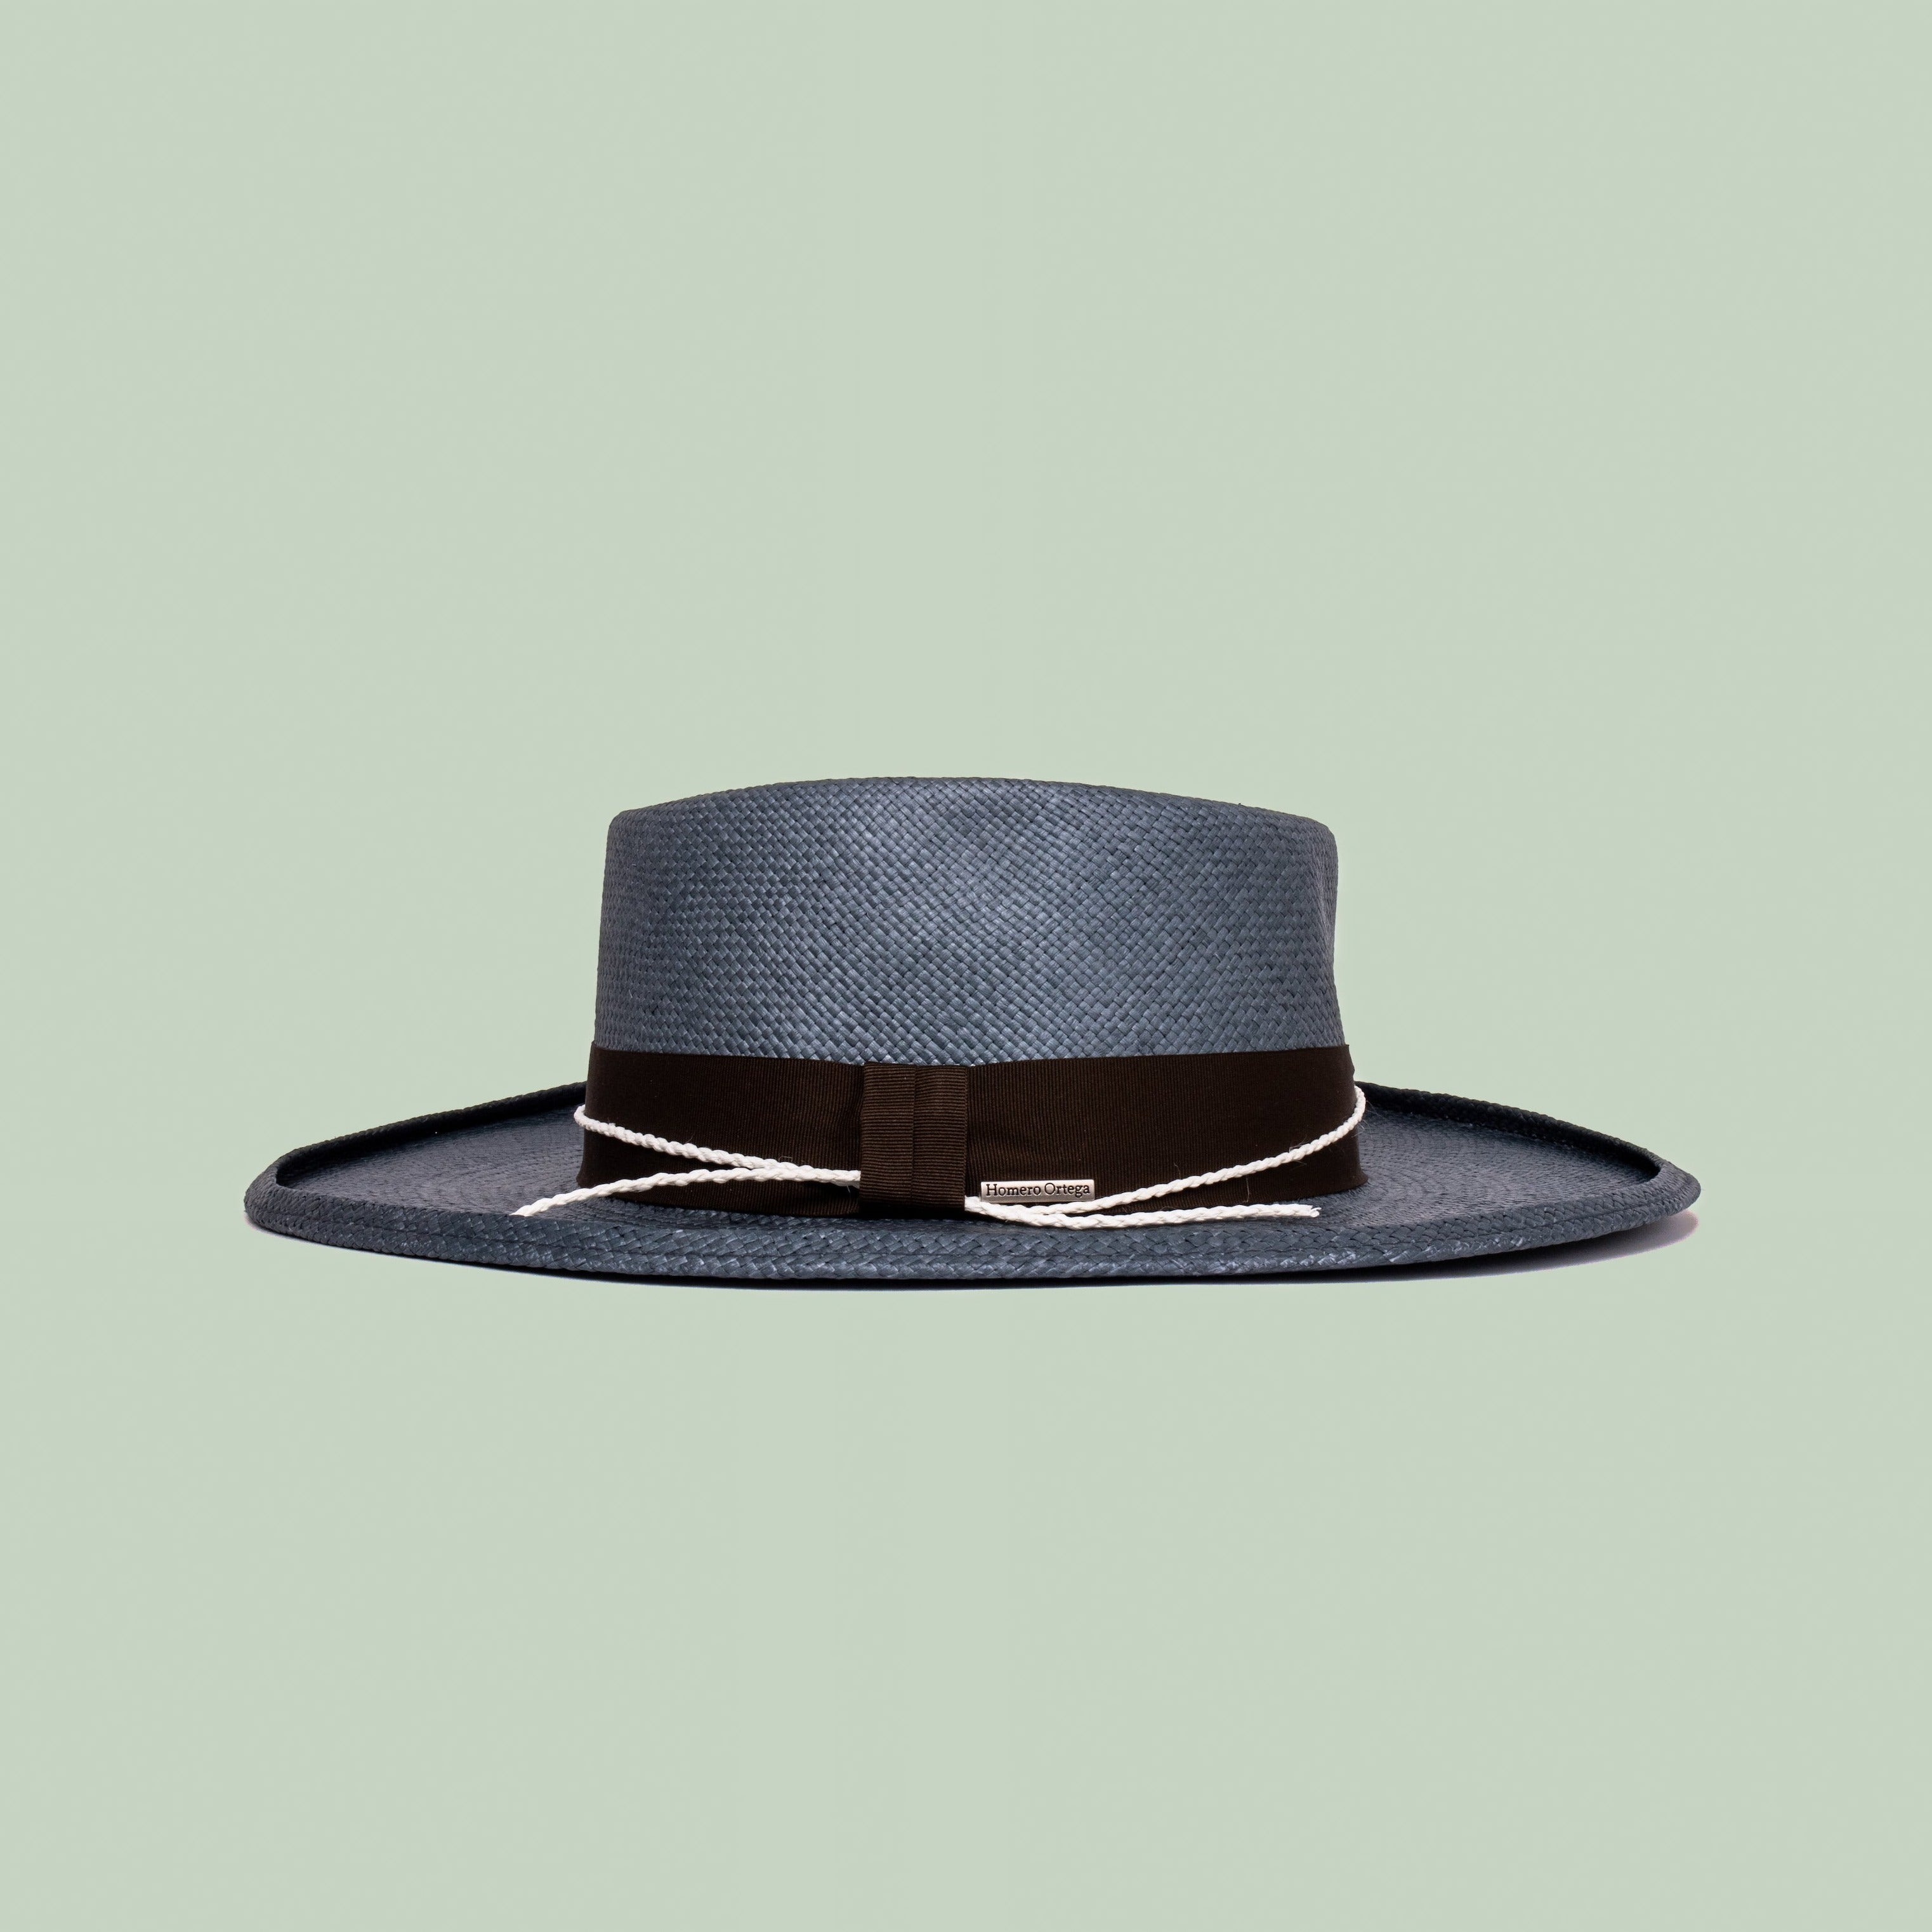 sustainable hats for men melbourne